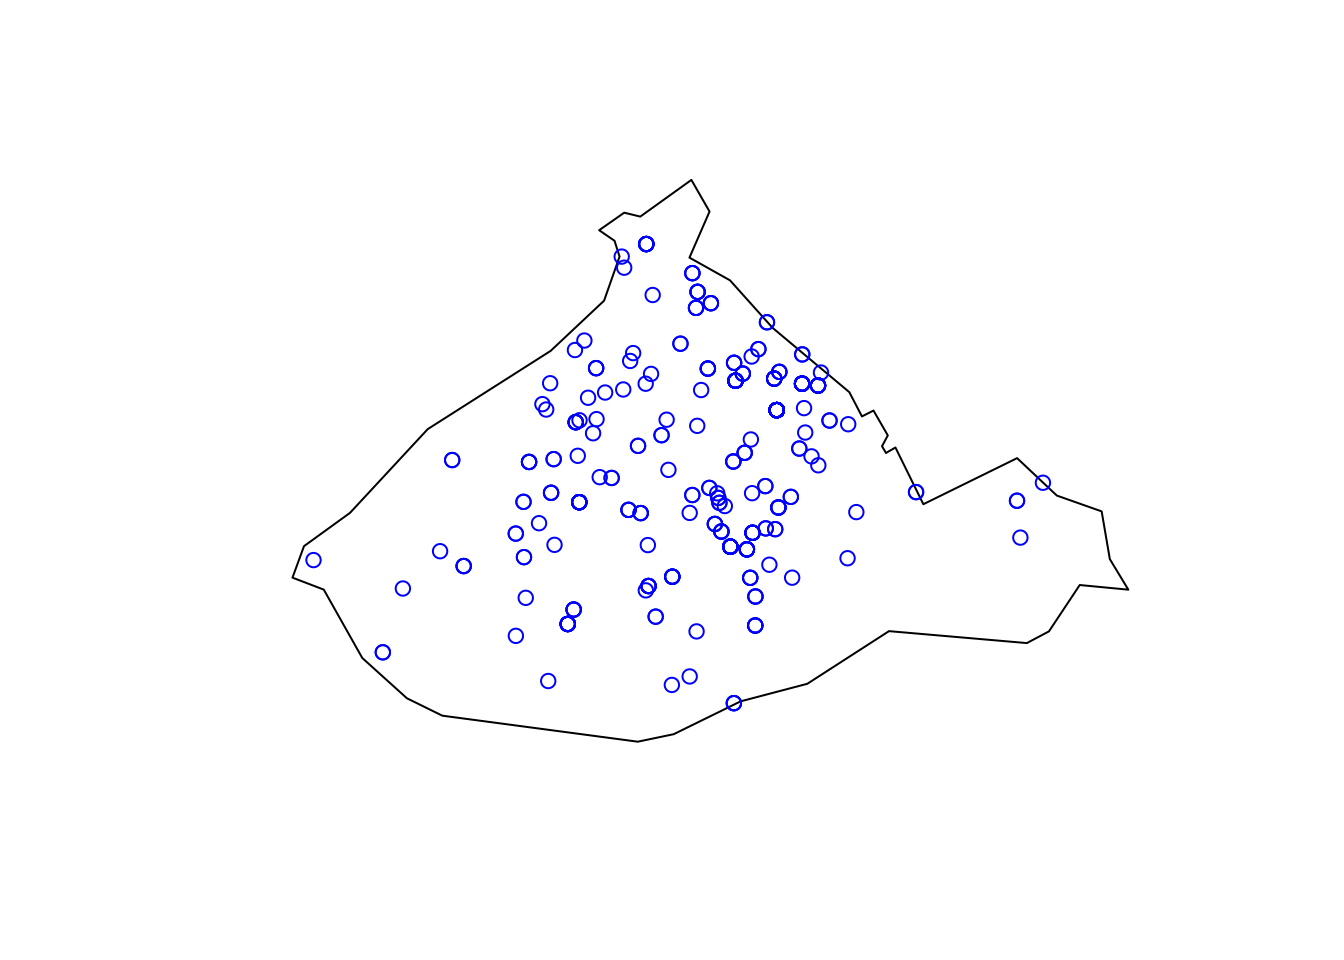 An outline of the City Centre ward, with numerous blue circles spread across its interior. The far east and west areas are more sparse with circles than the rest.